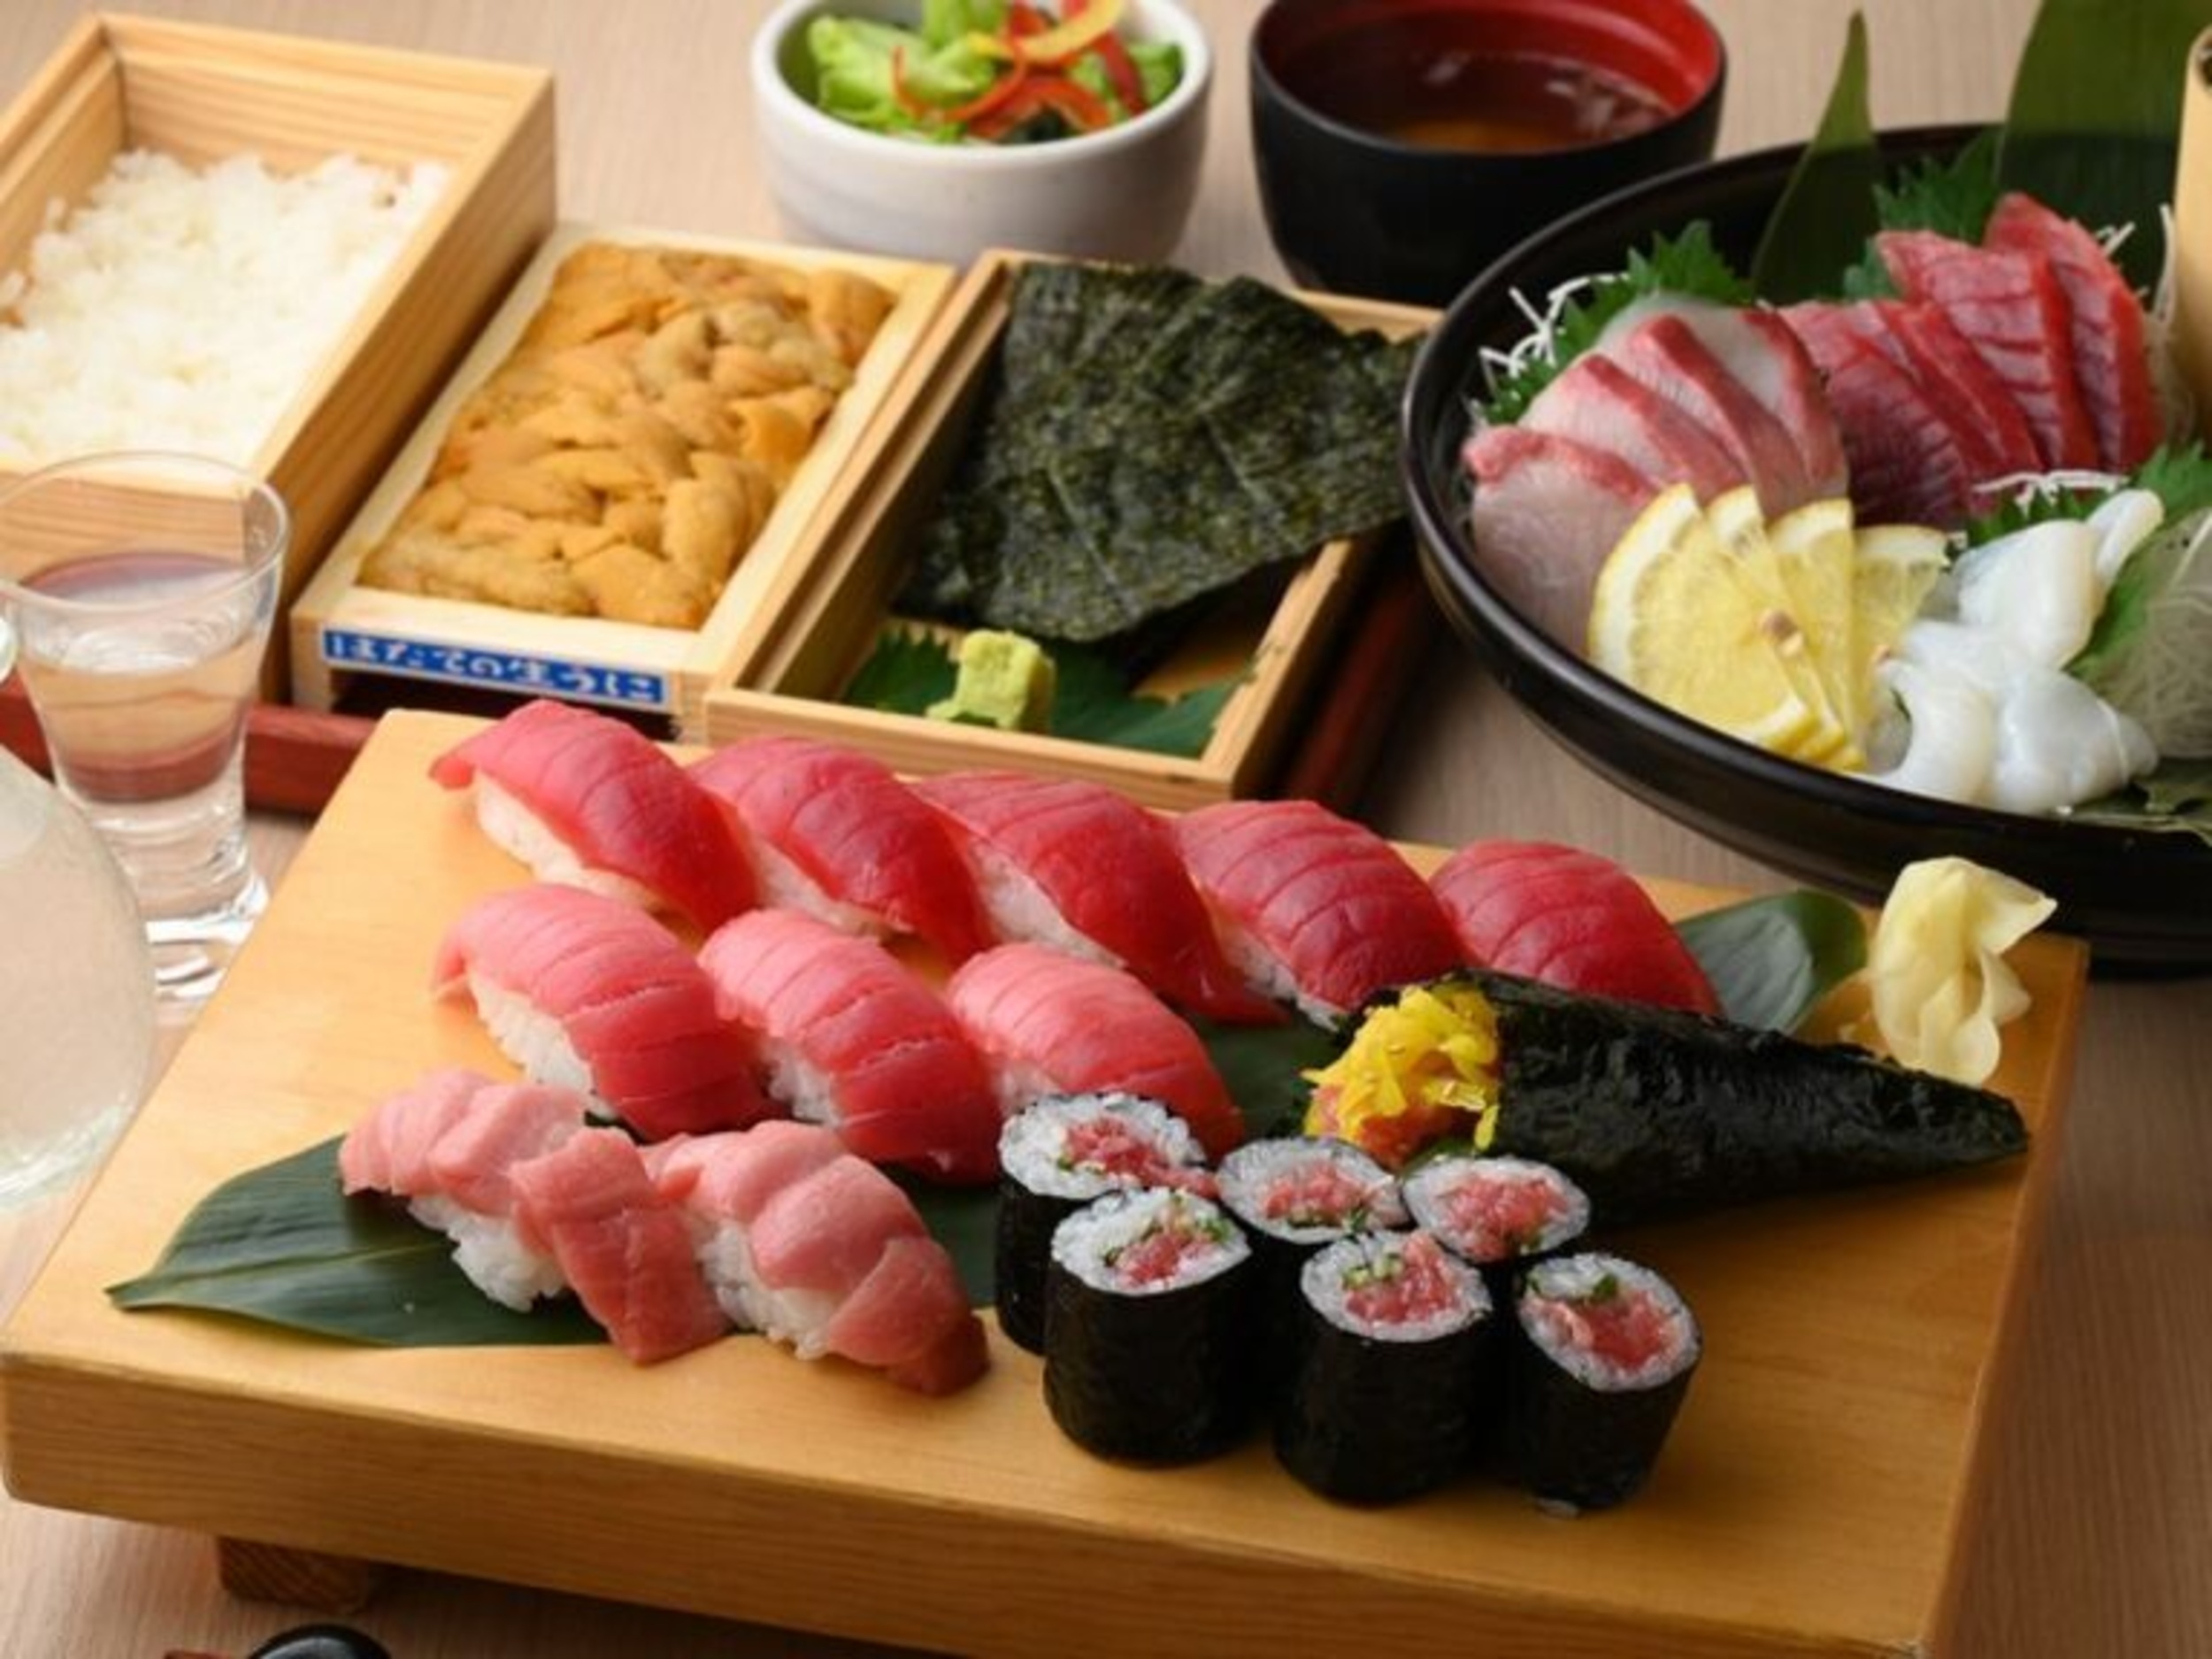 <p>It's on every tourist's menu when they arrive in Tokyo. Sushi! There are too many iconic sushi spots to mention, and trying to pick just one would be like trying to pick just one place to eat pasta in Italy. We recommend you ask the locals, who will likely point you to their favorite sushi spot in the area. </p><p><a href='https://www.msn.com/en-us/community/channel/vid-cj9pqbr0vn9in2b6ddcd8sfgpfq6x6utp44fssrv6mc2gtybw0us'>Follow us on MSN to see more of our exclusive lifestyle content.</a></p>